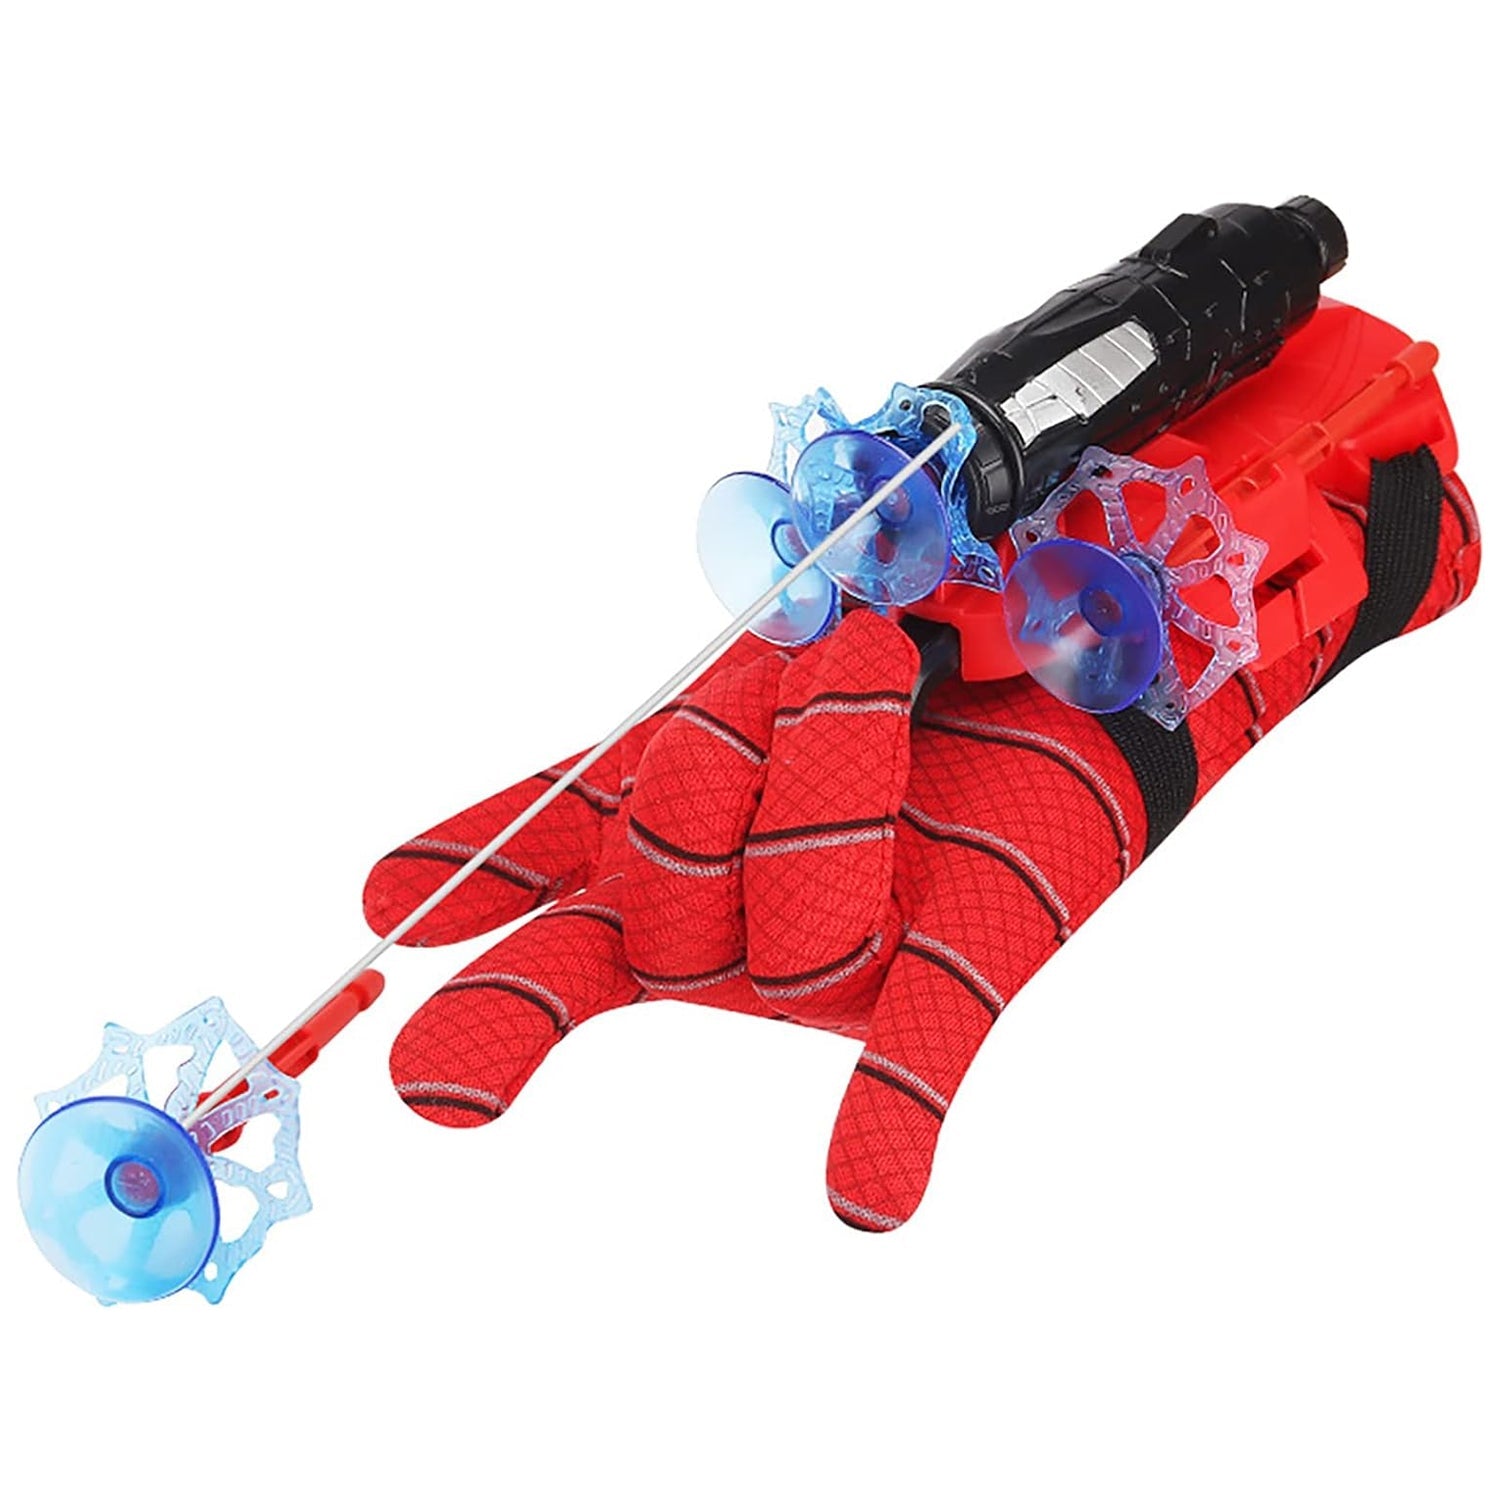 17601 Web Shooter Toy for Kids Fans, Launcher Wrist Gloves Toys For Kids, Boys Superhero Gloves Role-Play Toy Cosplay, Sticky Wall Soft Bomb Funny Children's Educational Toys